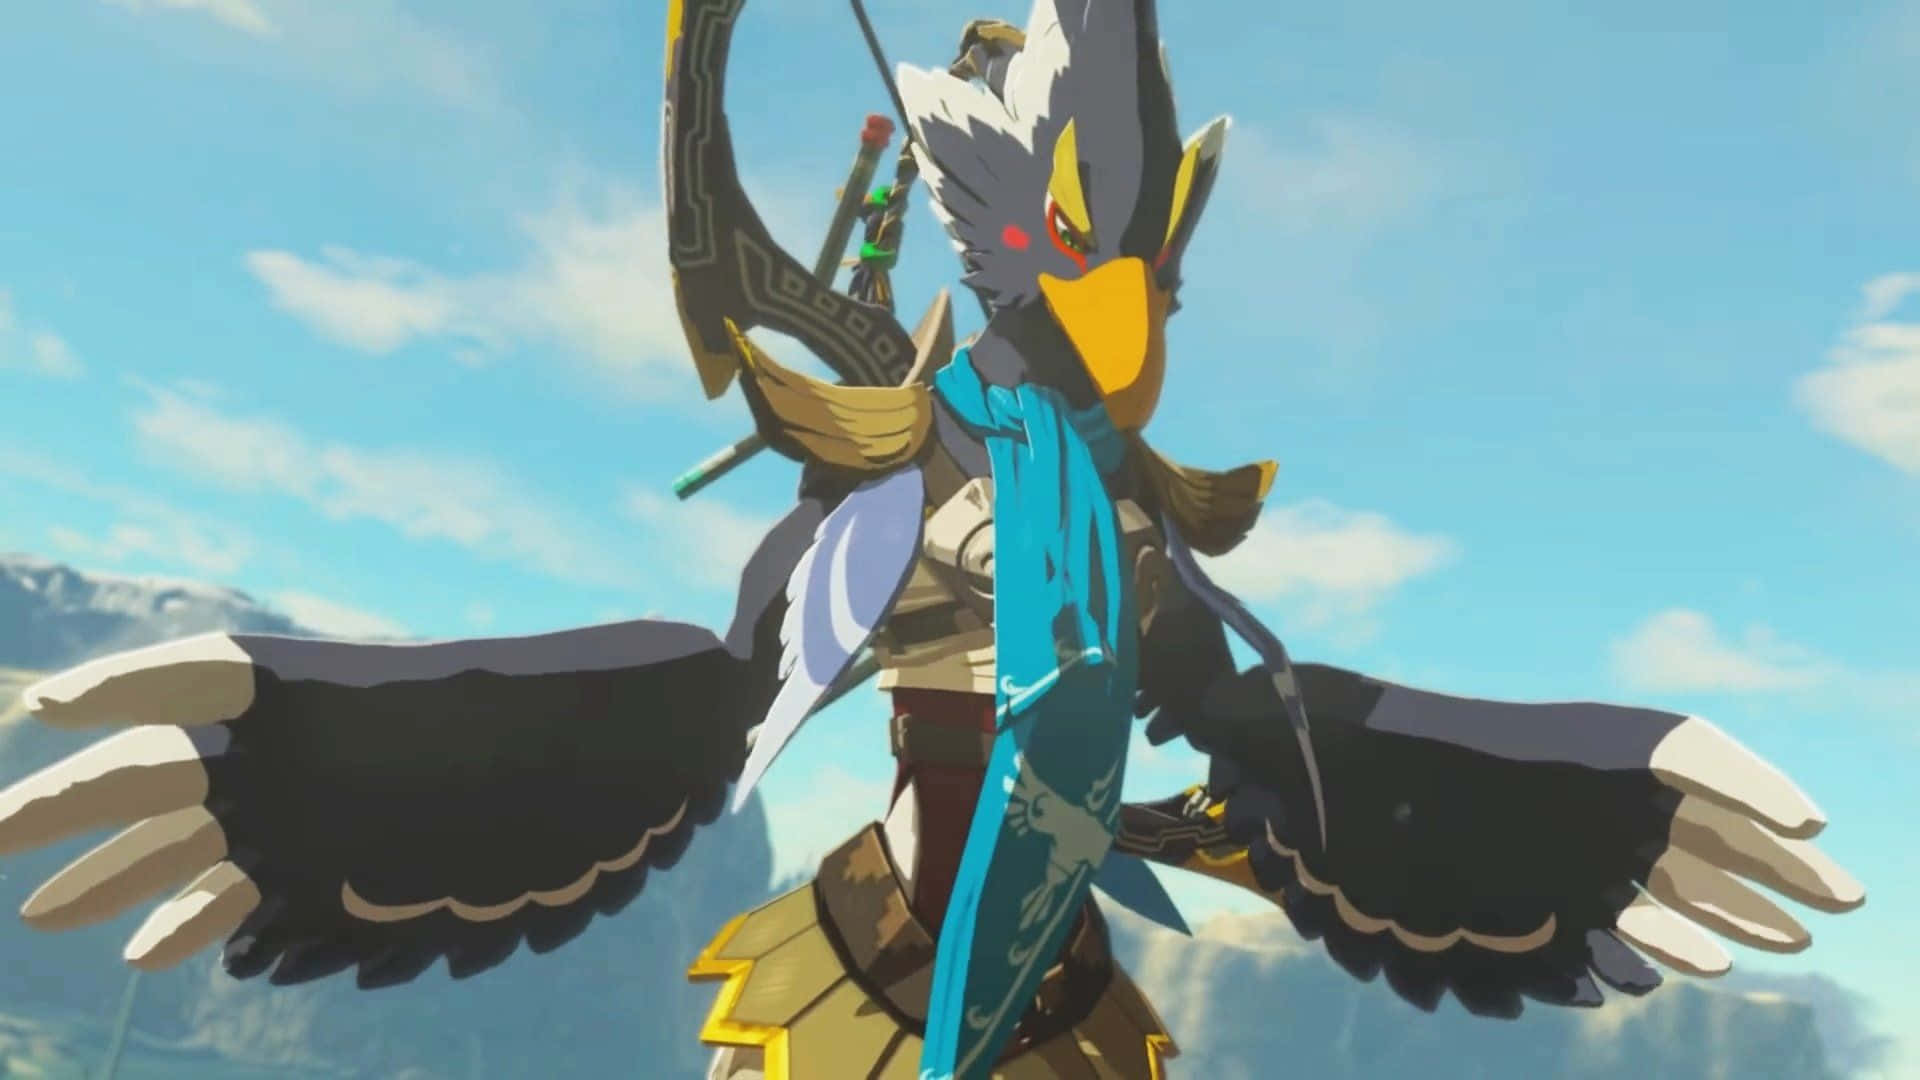 Revali, the legendary Rito Champion from The Legend of Zelda, posing heroically on a scenic mountain peak in The Legend of Zelda - Revali wallpaper. Wallpaper